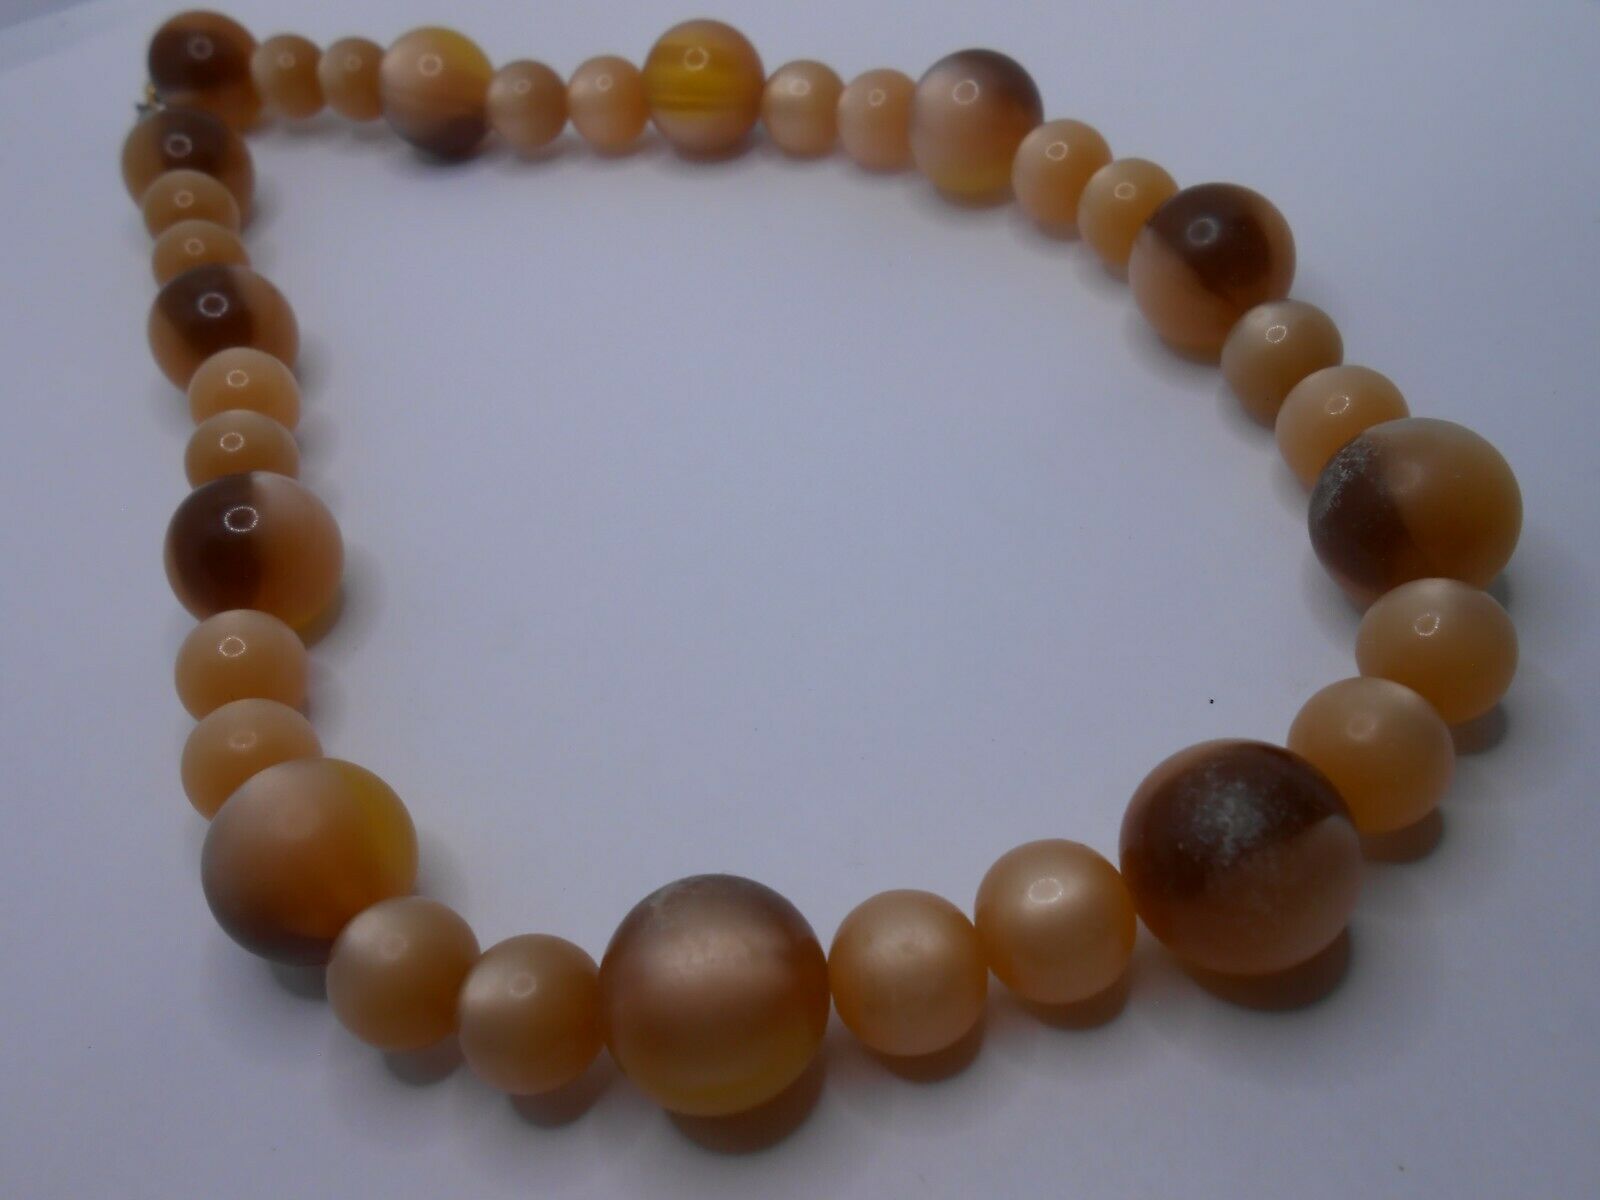 Antique Art Deco Thermoset Plastic Or Moonglow Lucite Bead Necklace 16'